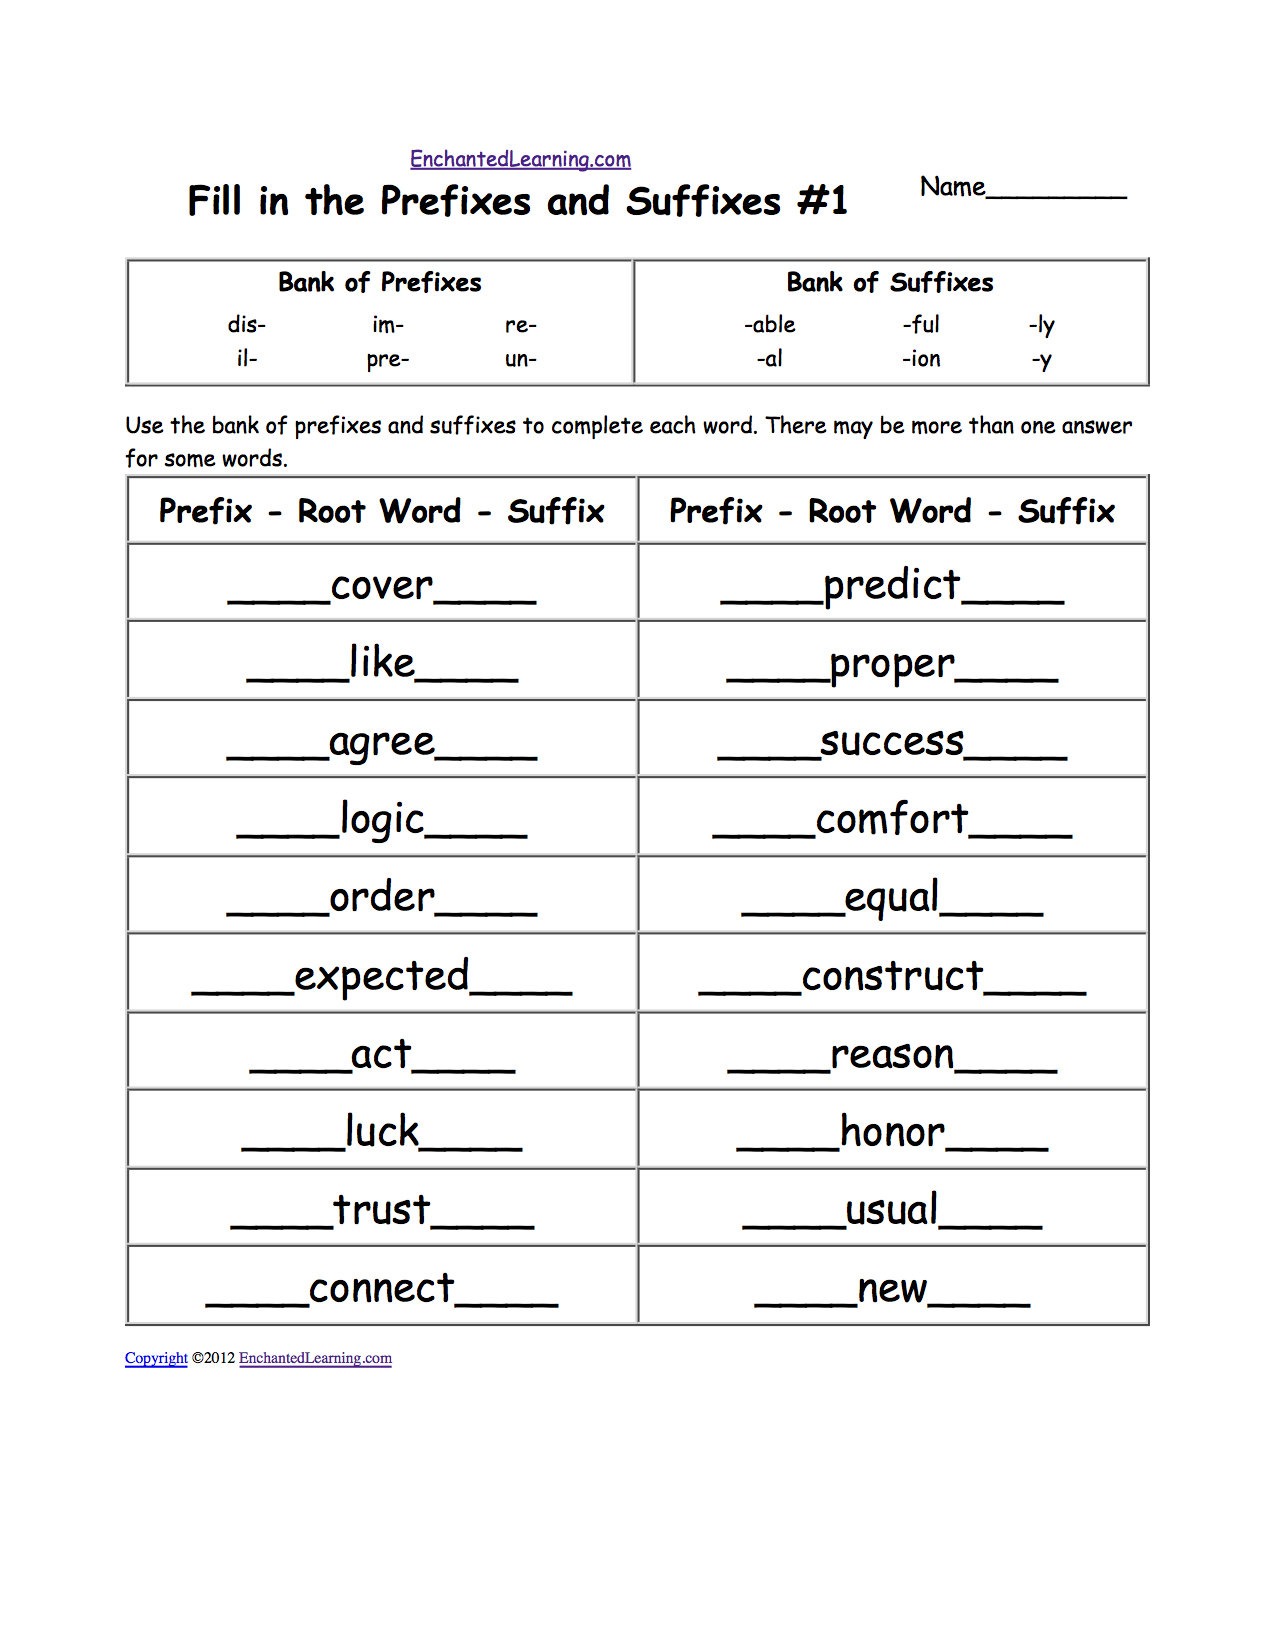 worksheets-and-activities-prefixes-and-suffixes-enchantedlearning